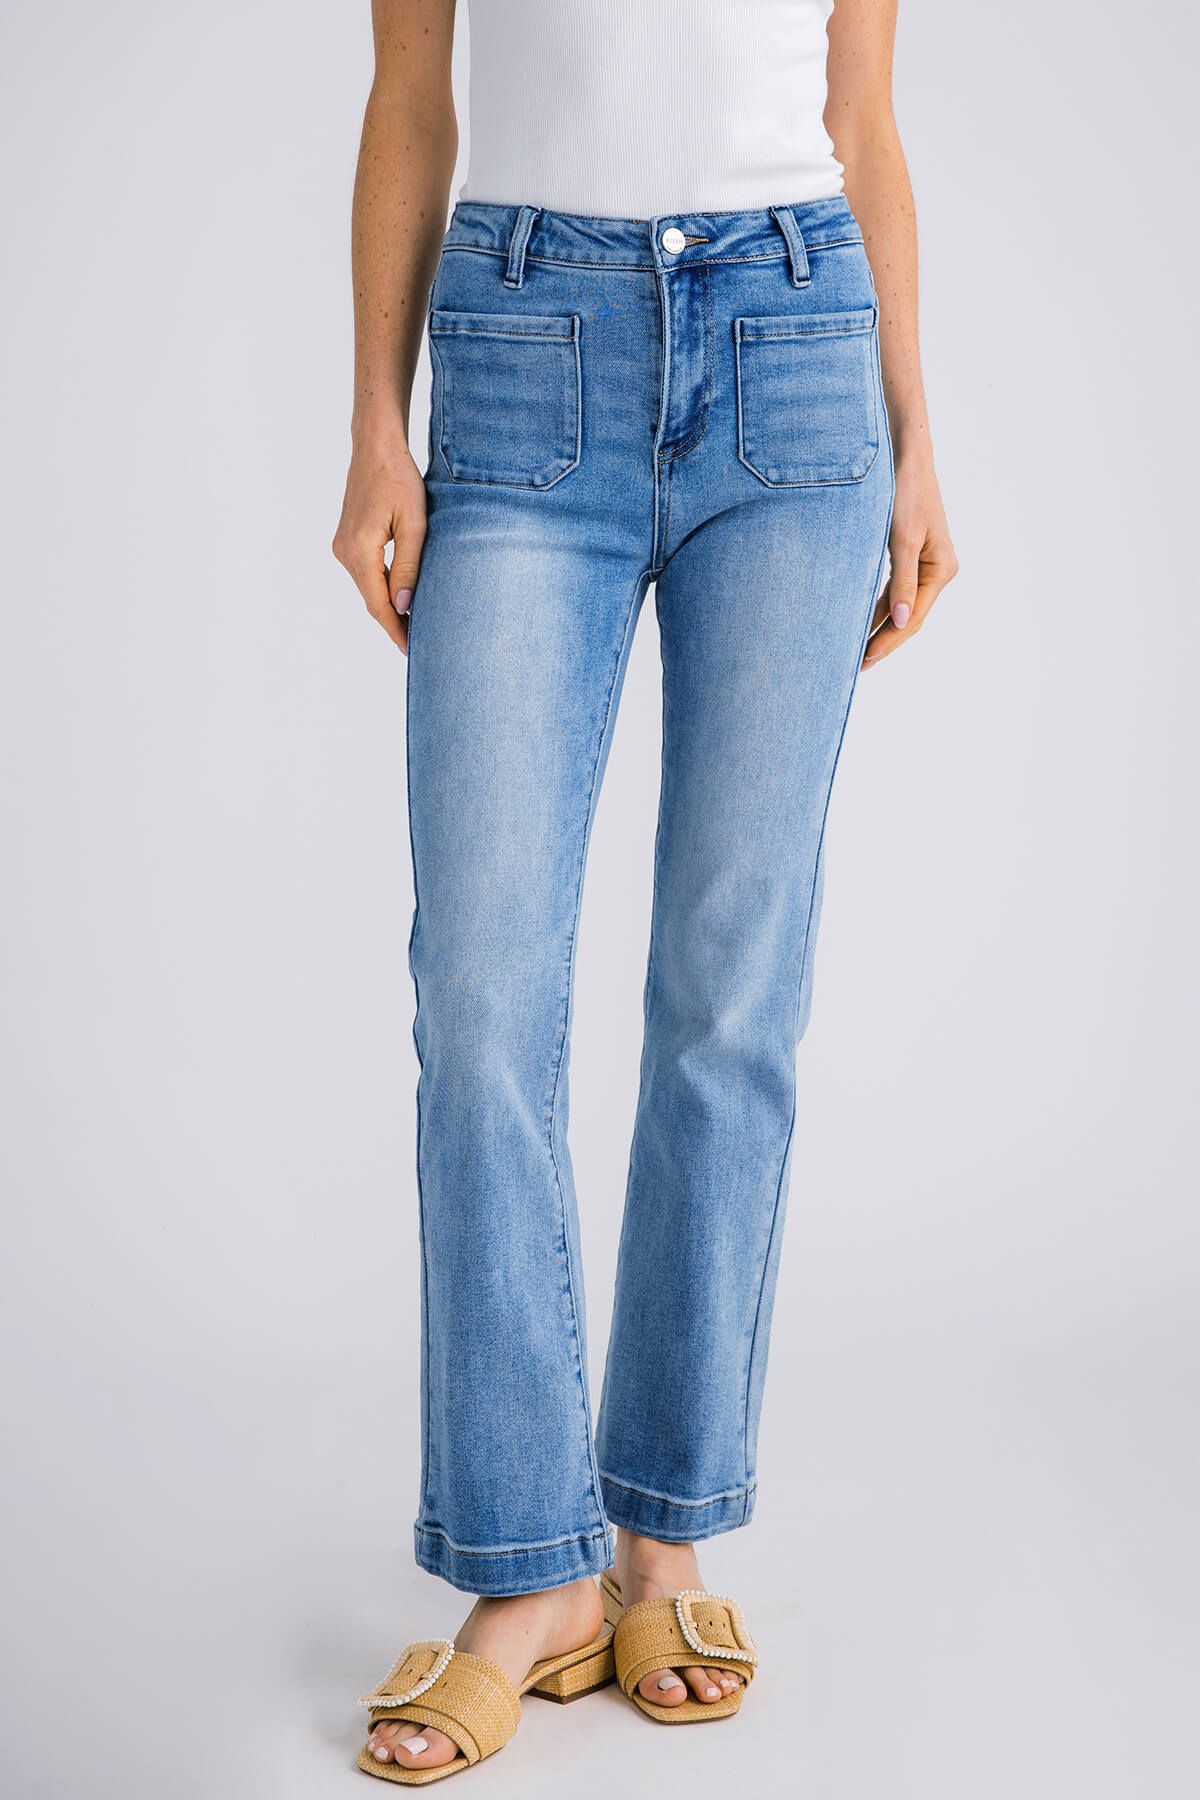 Risen Camille High Rise Patch Pocket Straight Jeans | Social Threads